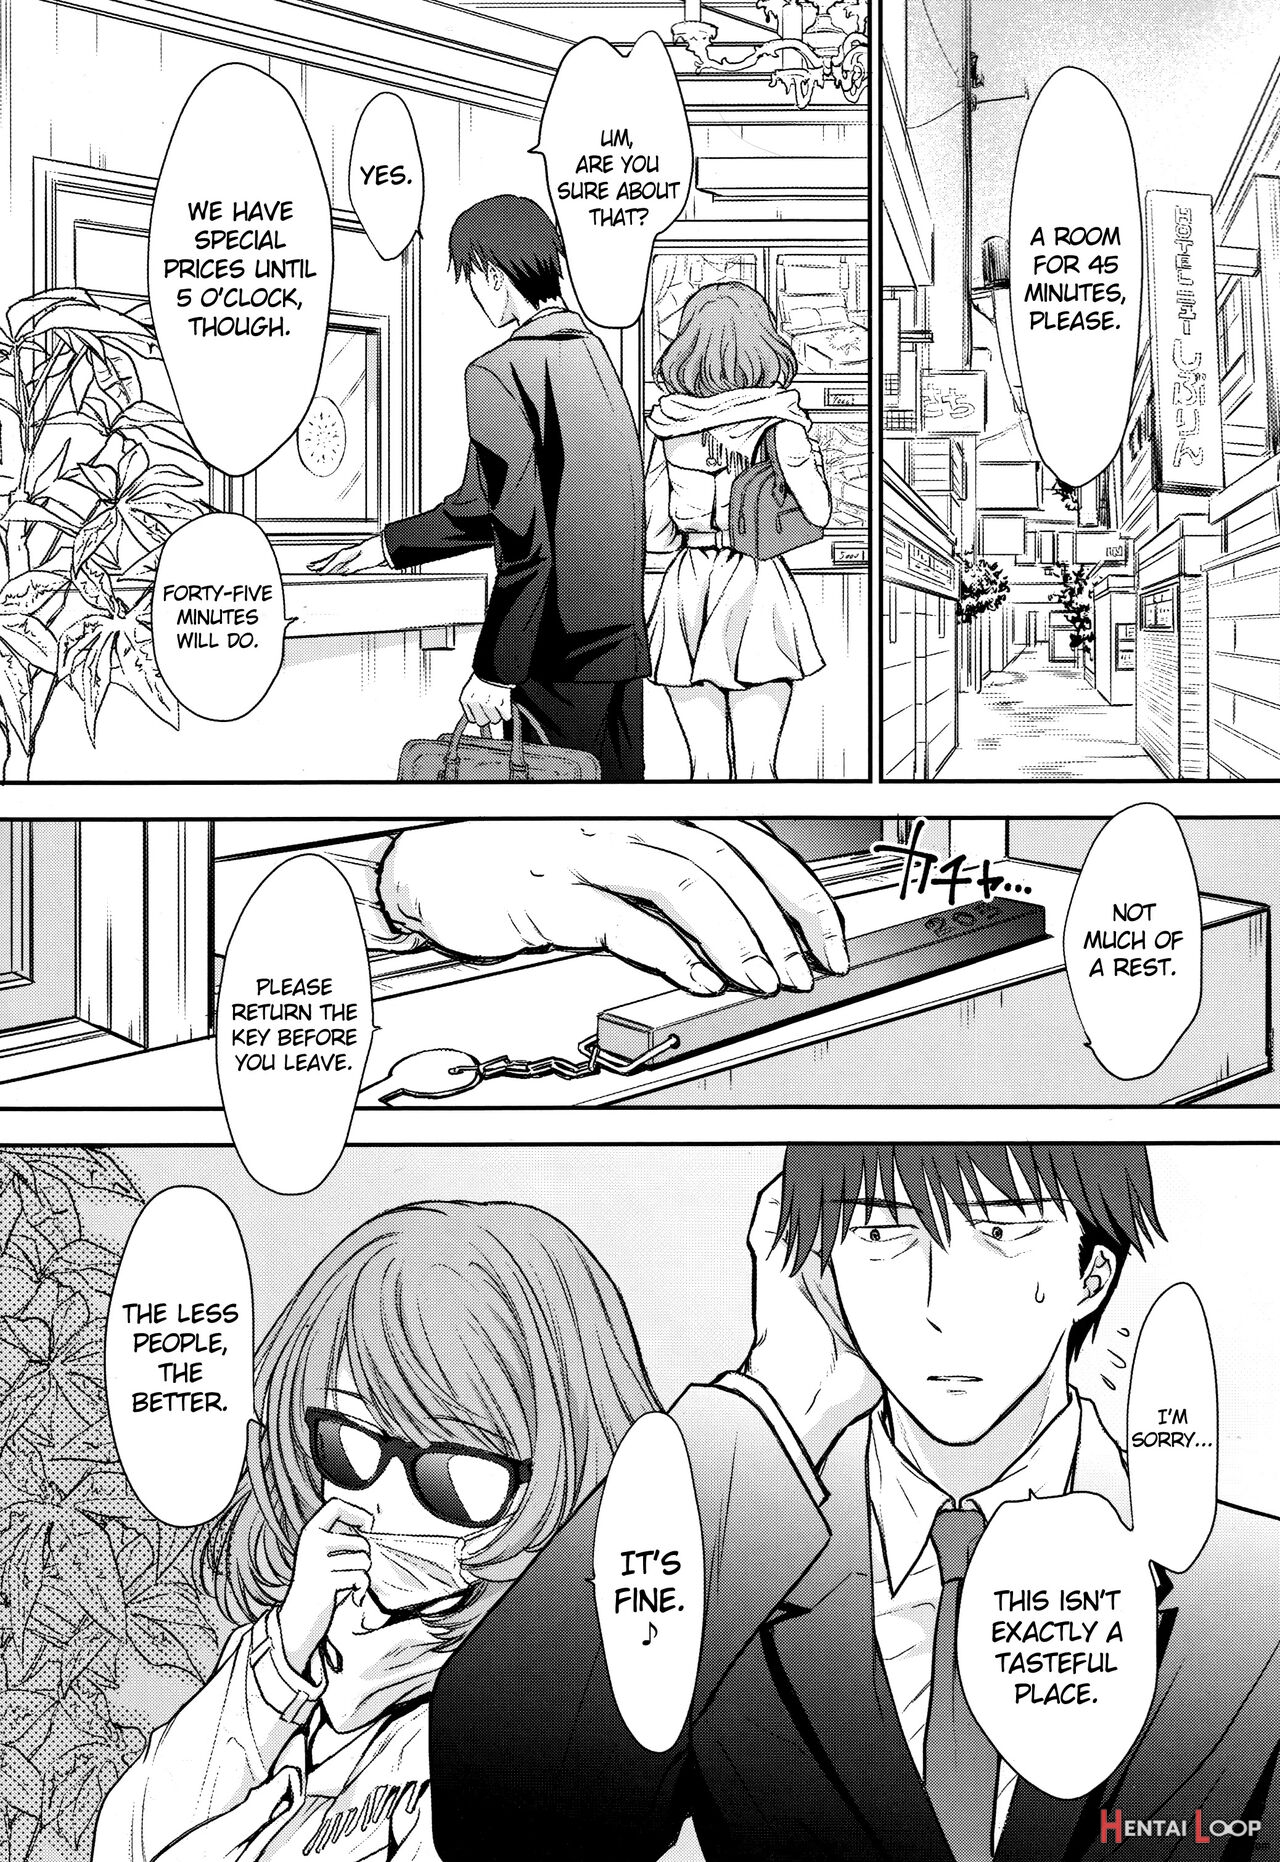 Meeting With Kaede-san In A Love Hotel page 2